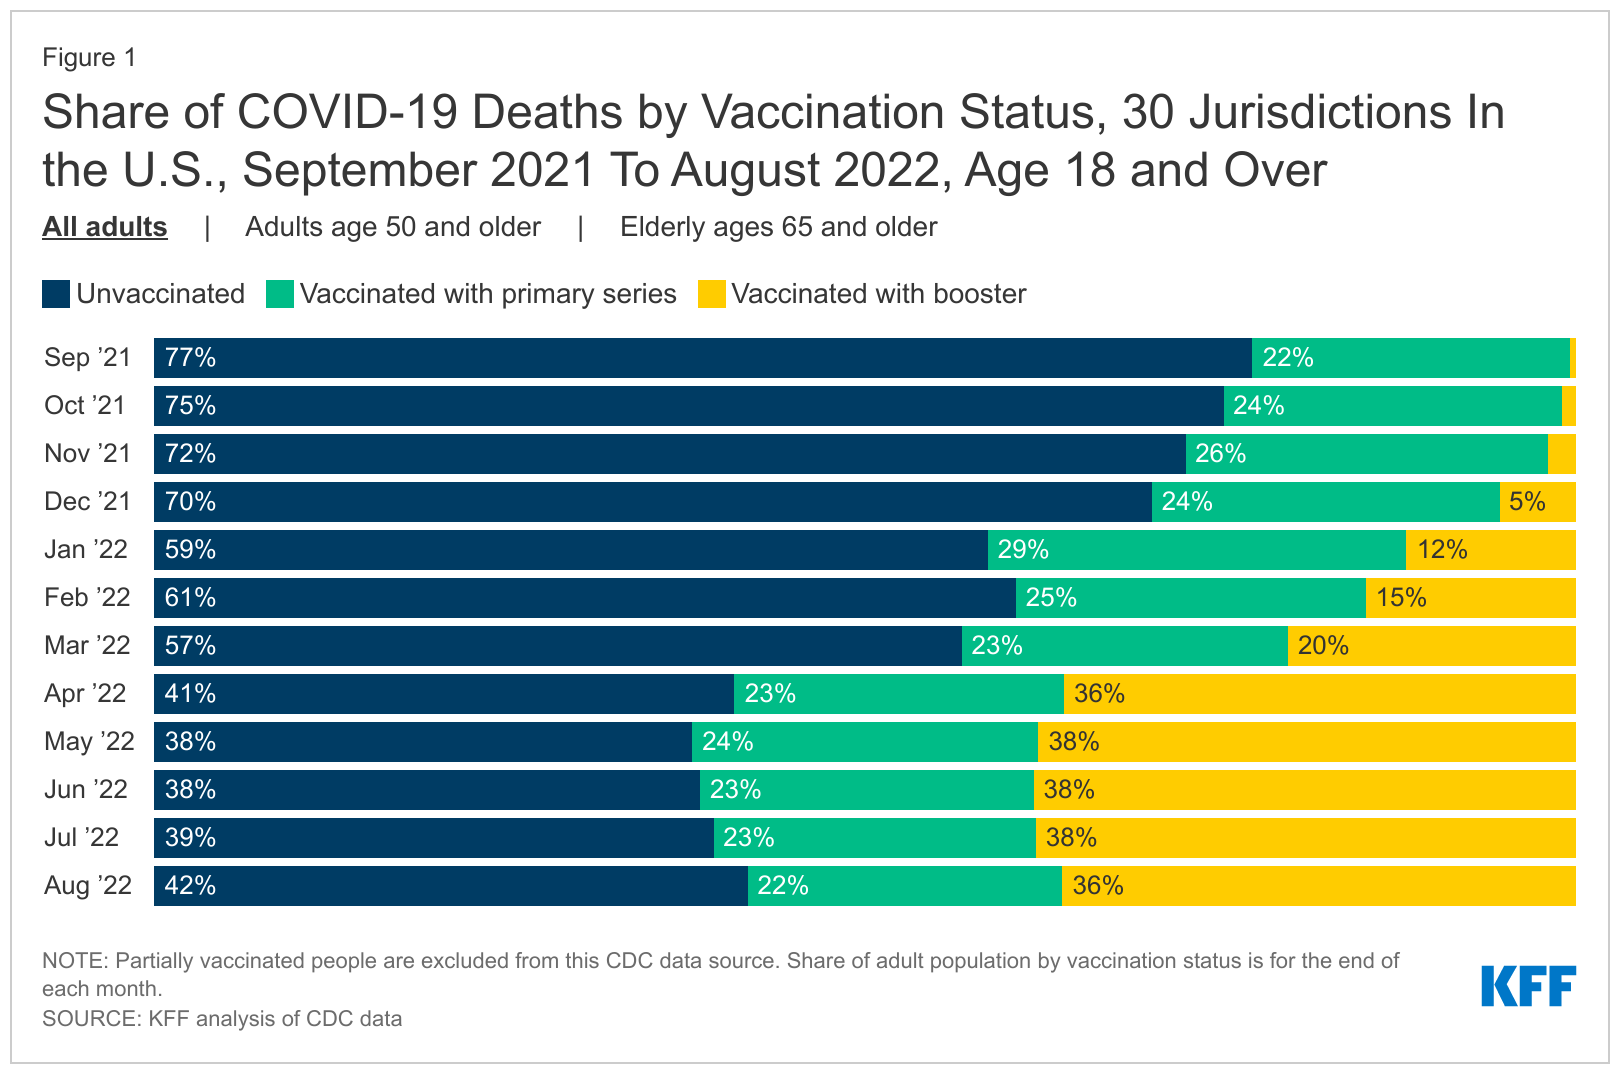 https://img.theepochtimes.com/assets/uploads/2022/11/30/share-of-covid-19-deaths-by-vaccination-status-30-jurisdictions-in-the-u.s.-september-2021-to-august-2022-age-18-and-over.png